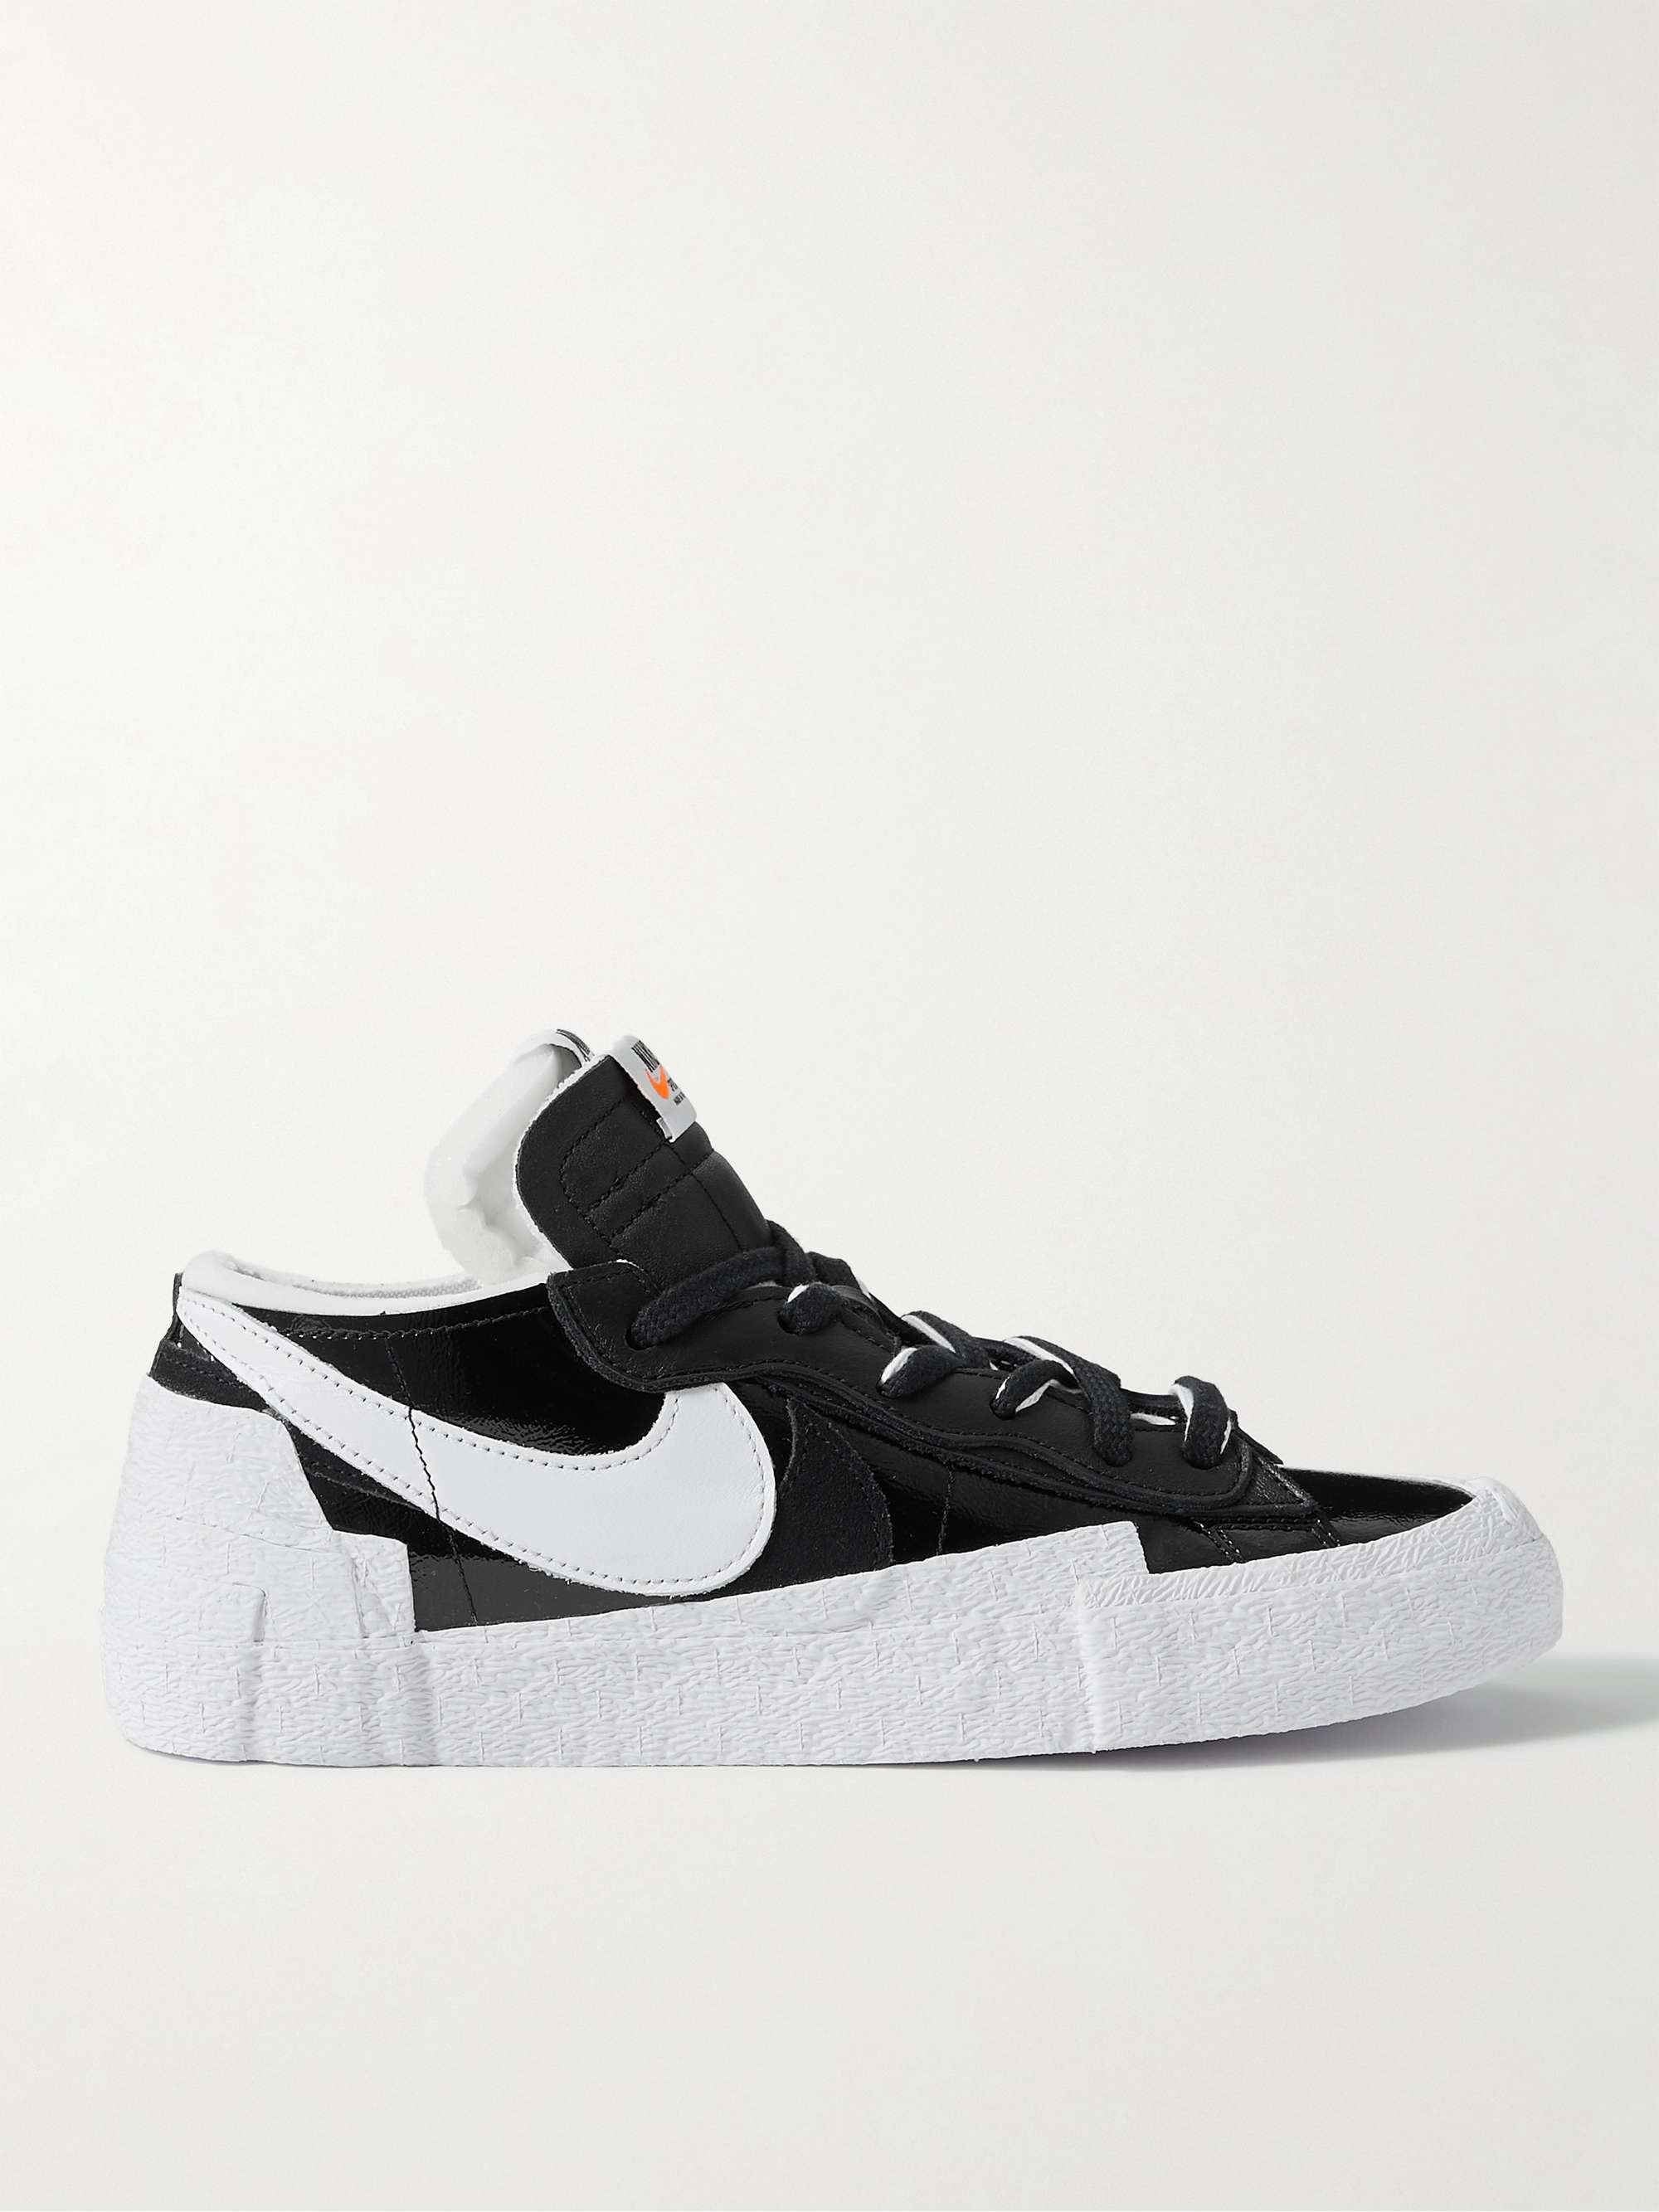 Black + Sacai Blazer Low Suede-Trimmed Leather Sneakers | NIKE | MR PORTER